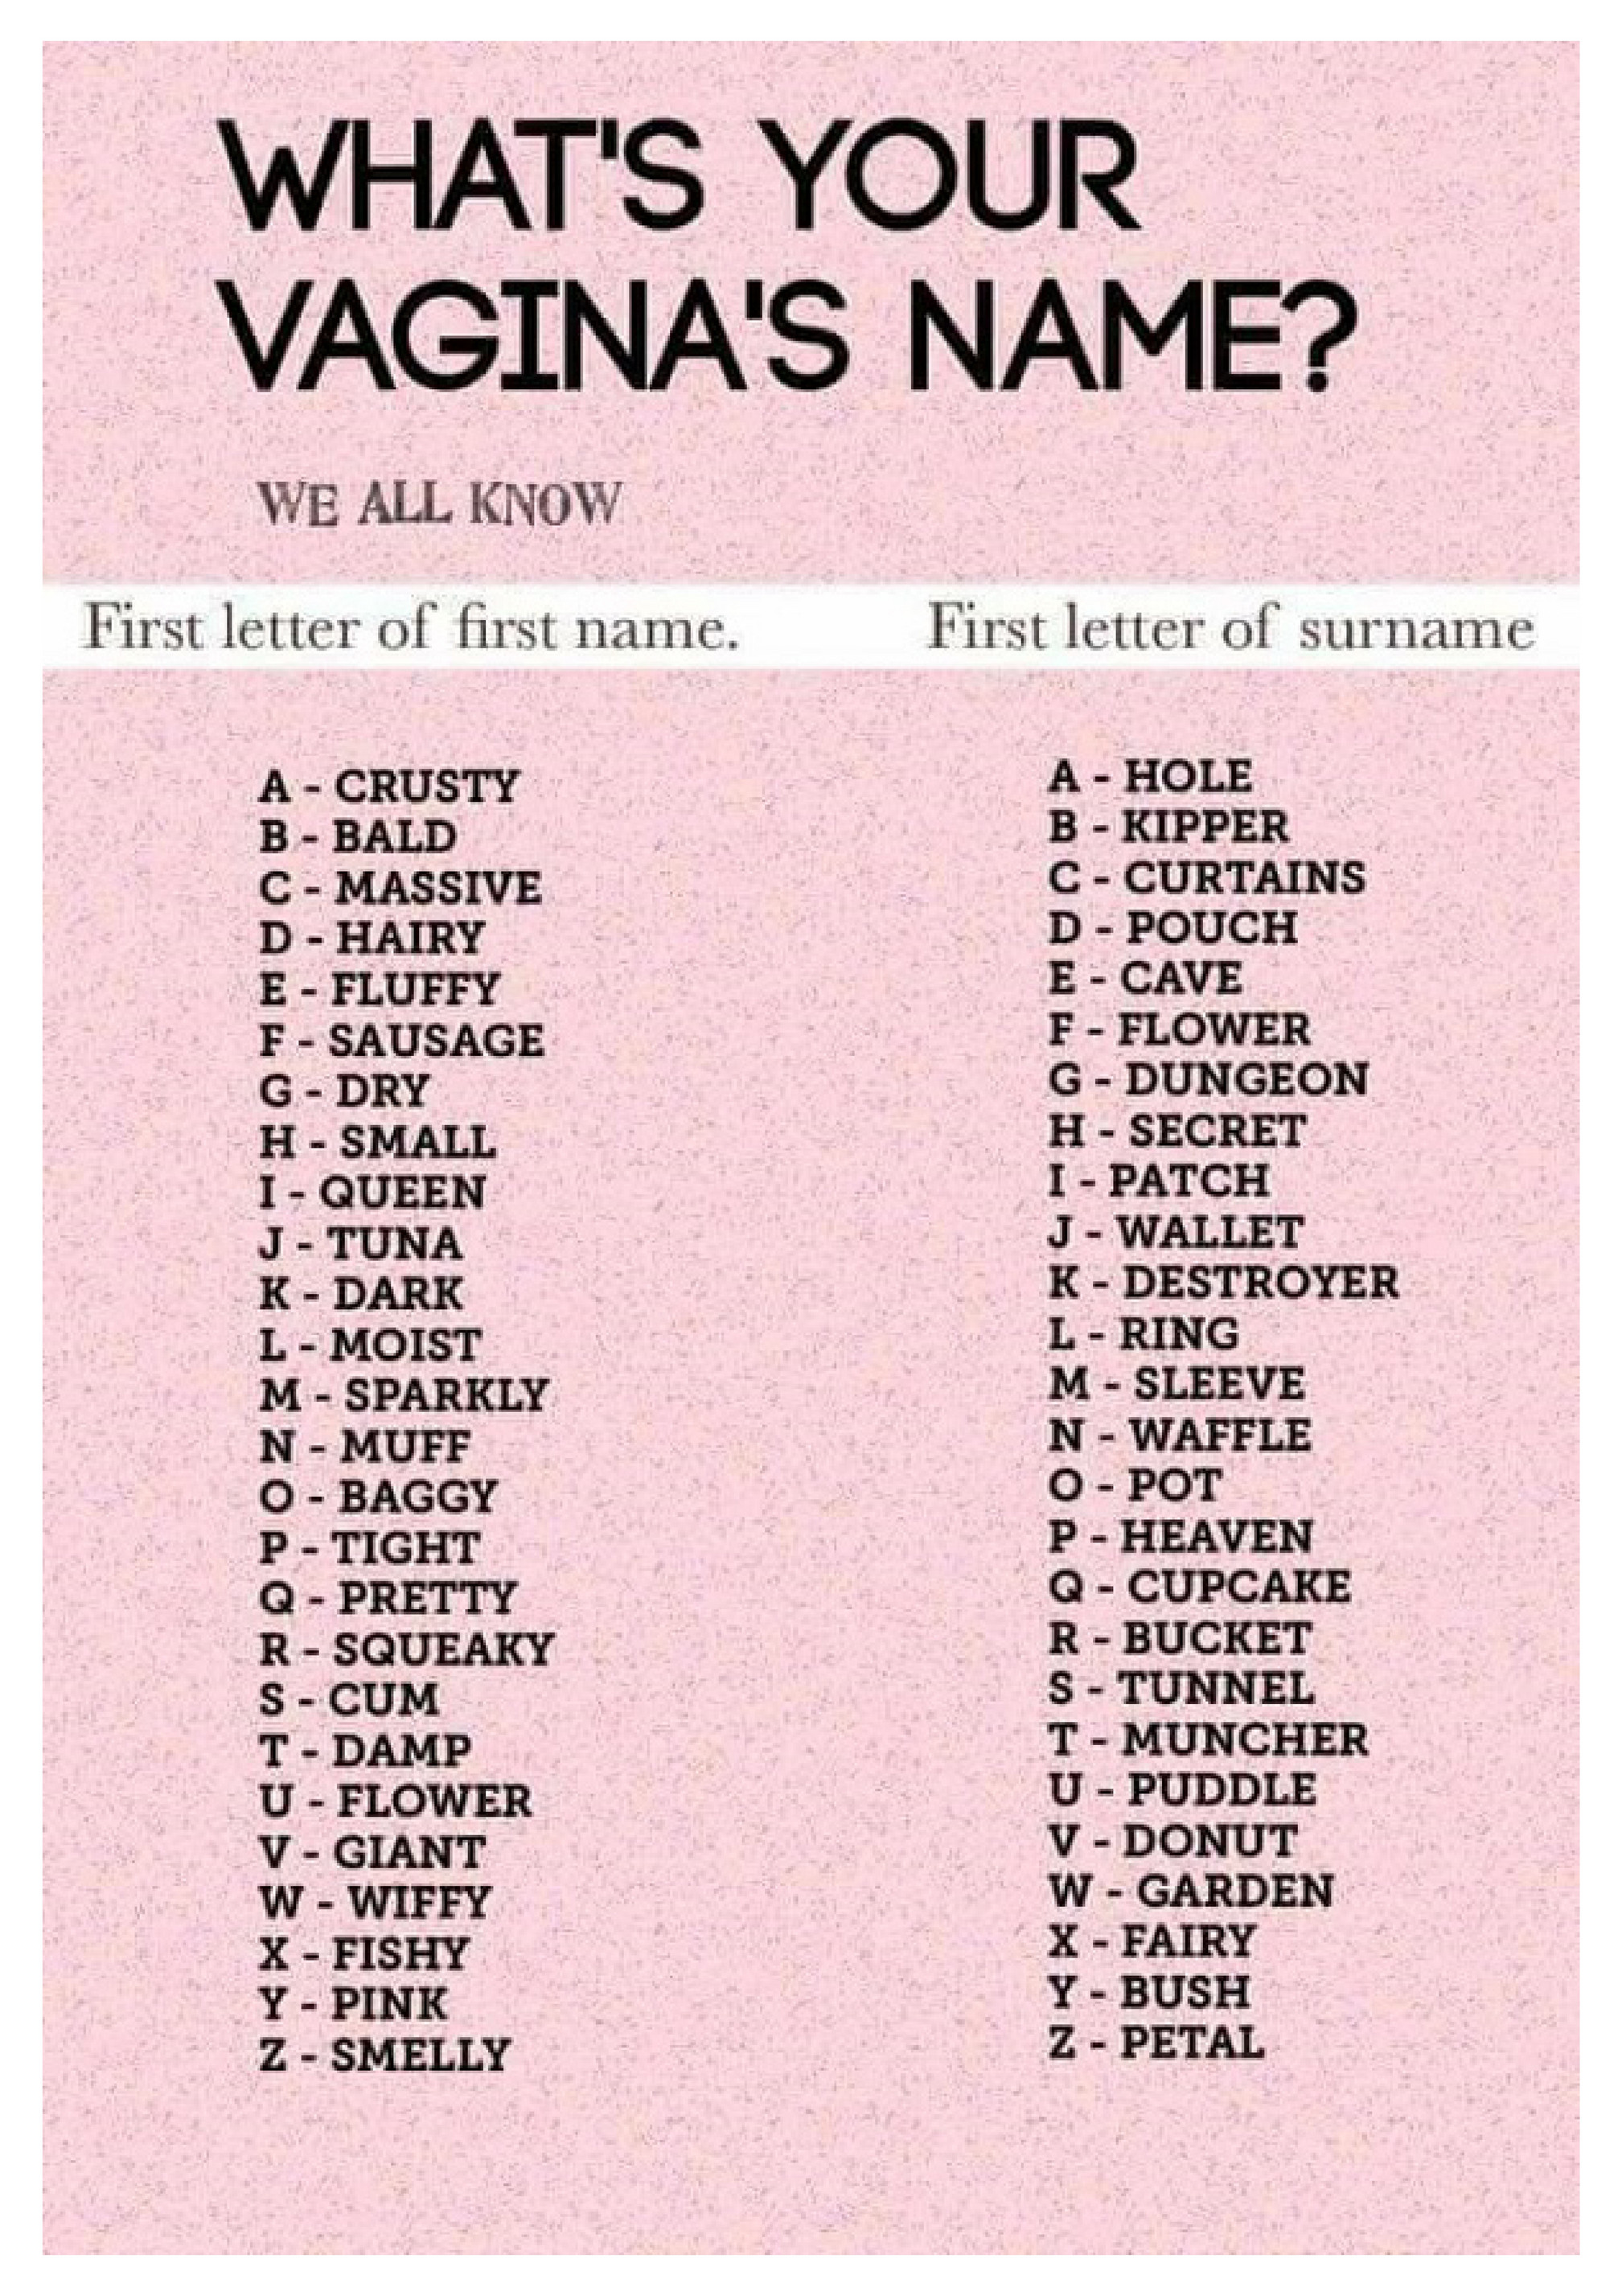 My publications - Funny Names for the Female Vagina - Page 1 - Created with  